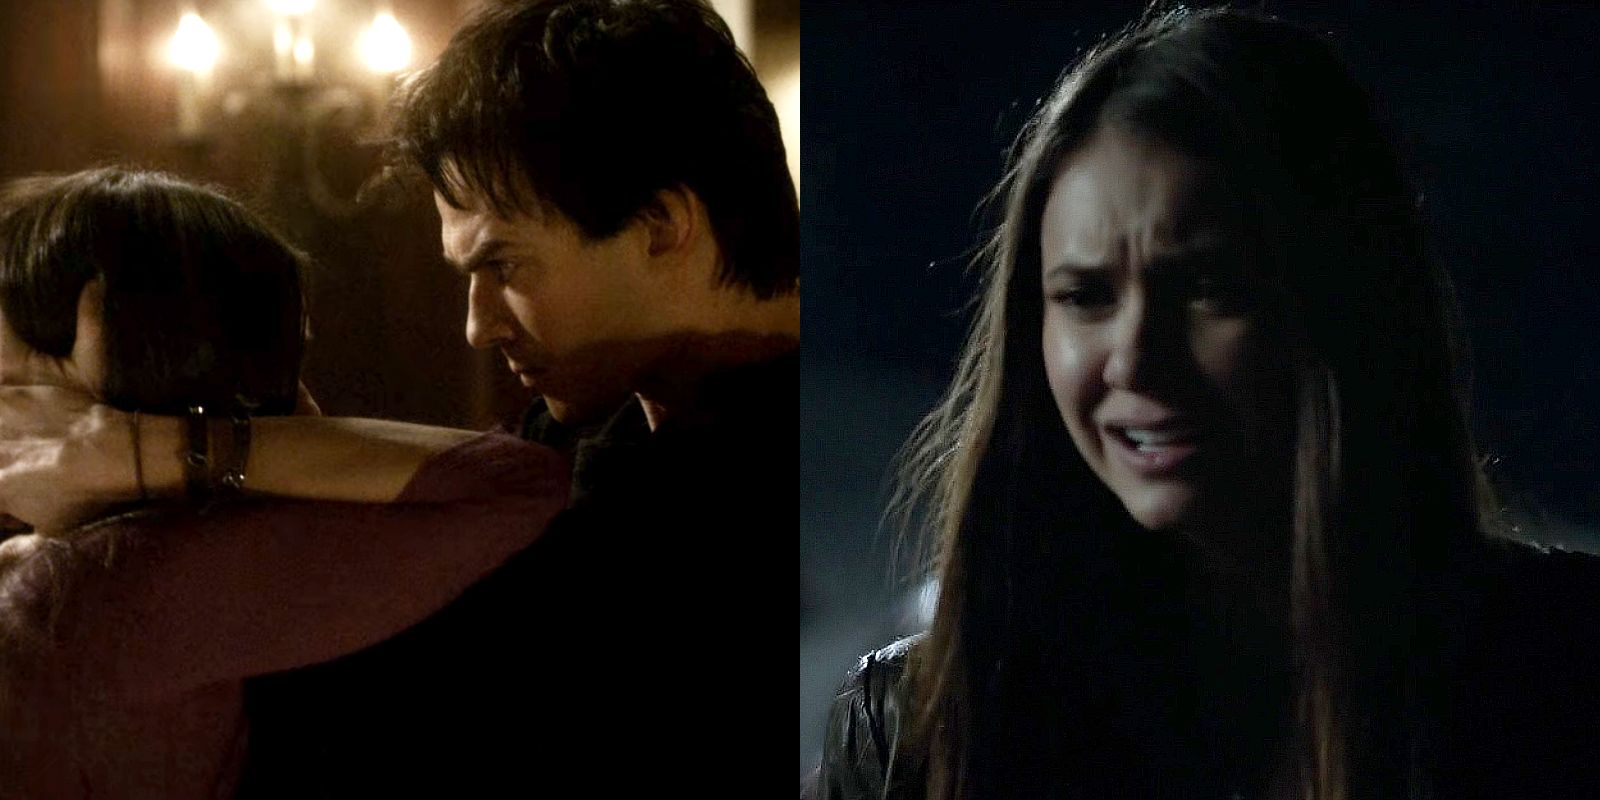 The Vampire Diaries The 10 Worst Things The Salvatore Brothers Did To Elena